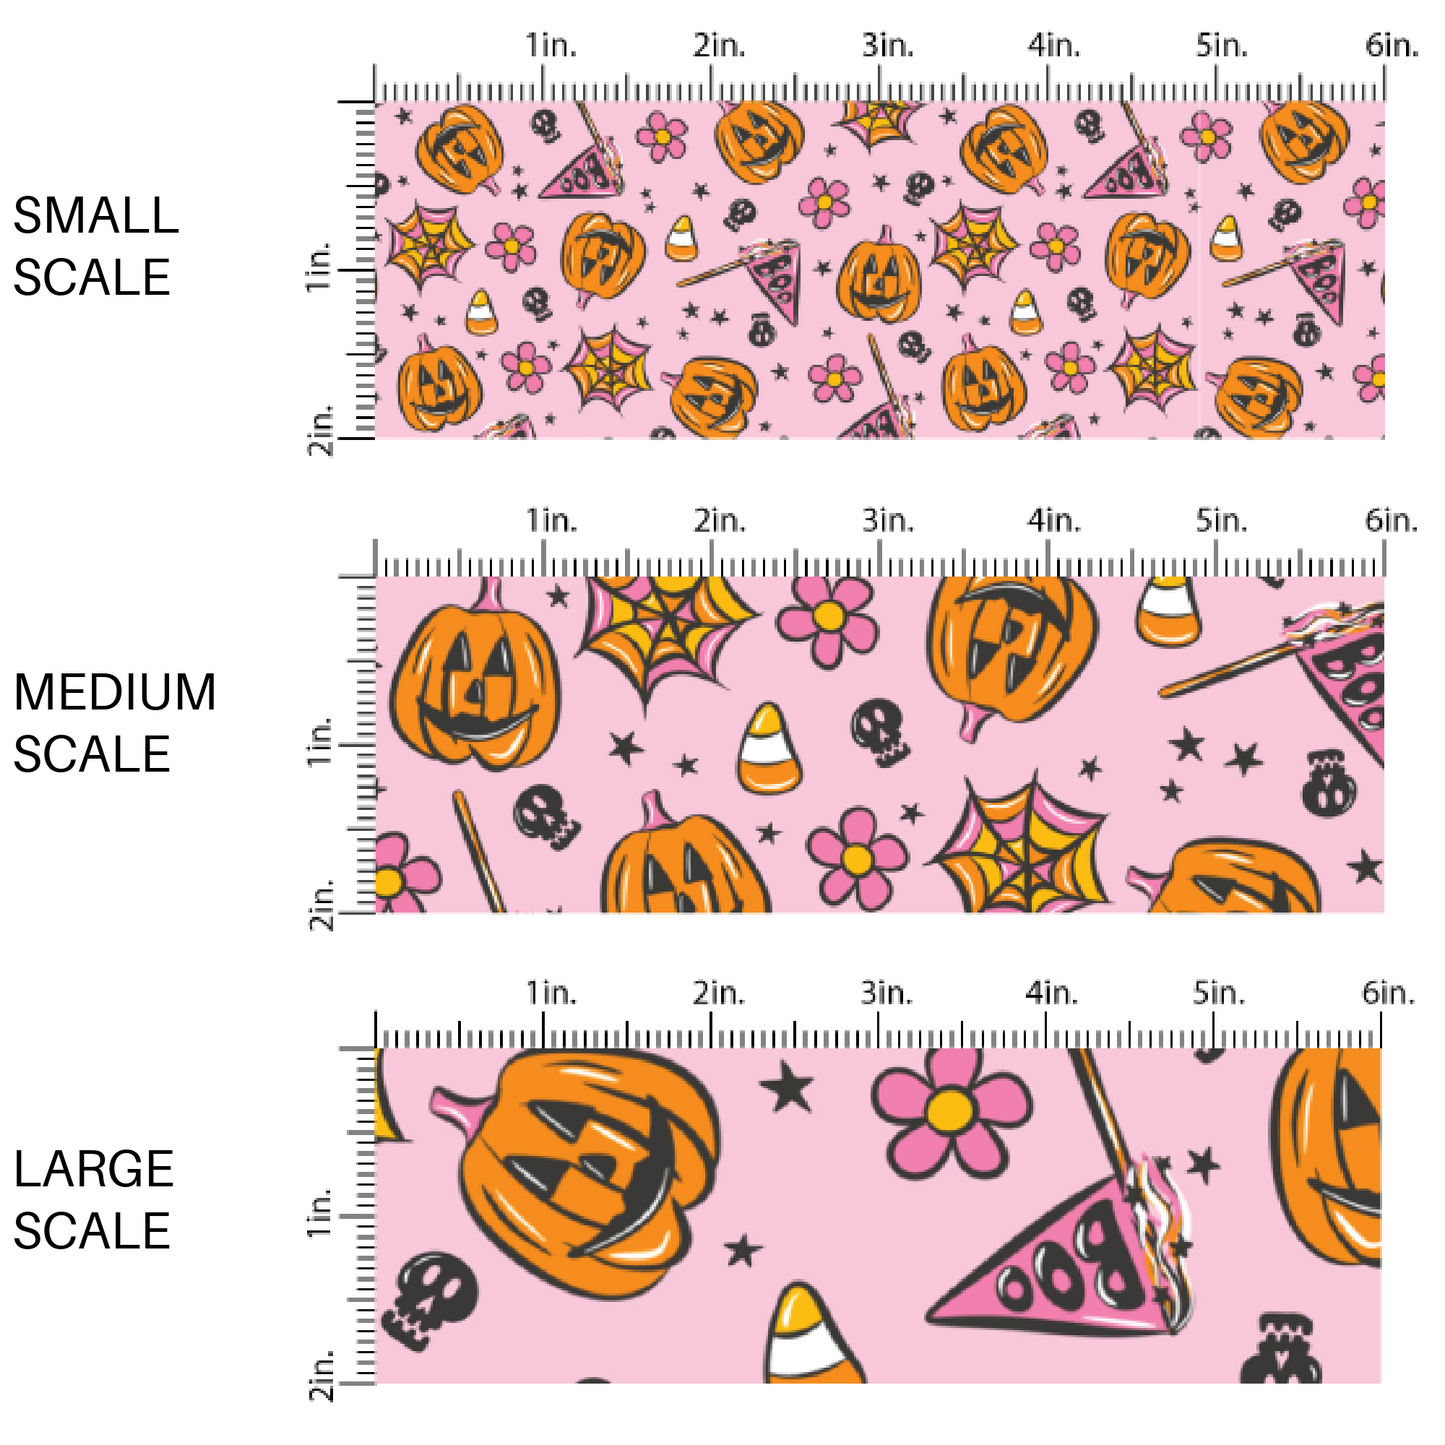 Pink fabric by the yard scaled image guide with pumpkins, florals, spiderwebs, and candy corn.